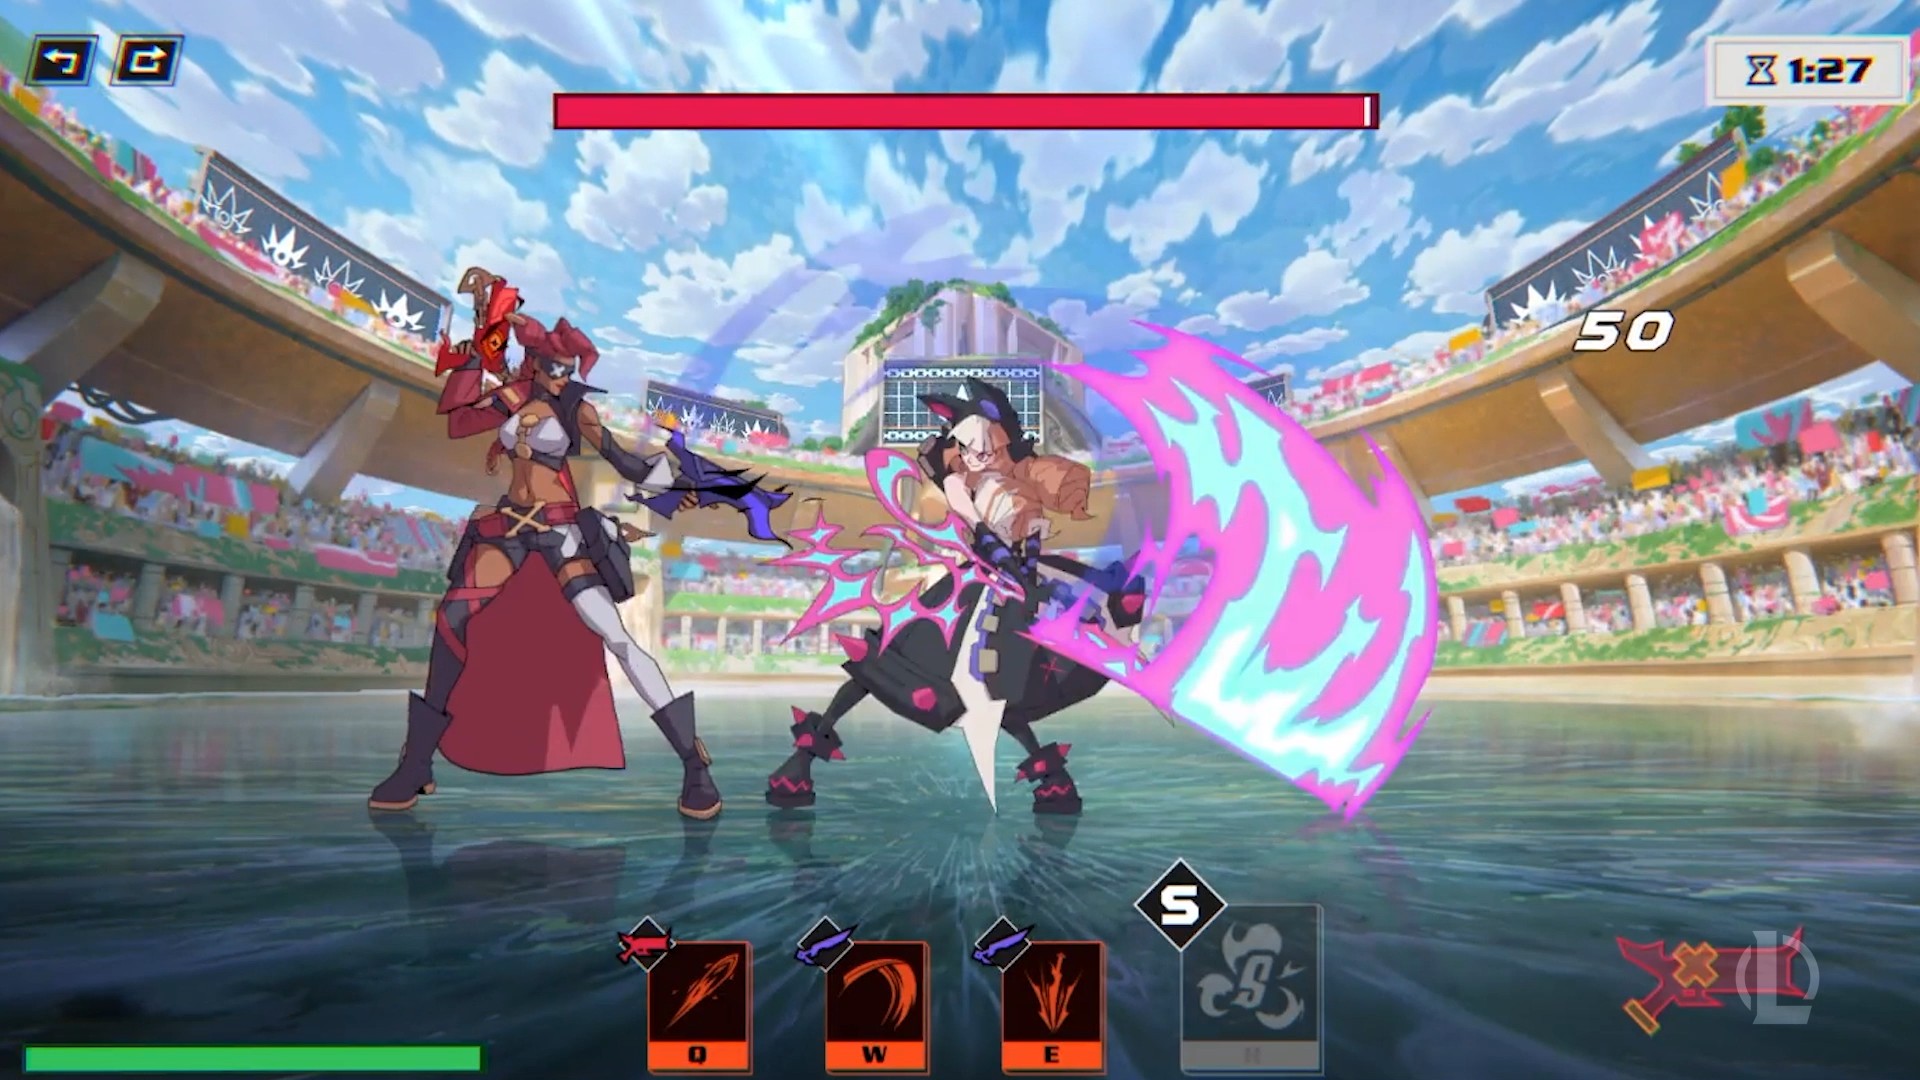 League of Legends Soul Fighter: Two warriors battle it out in Riot MOBA game League of Legends